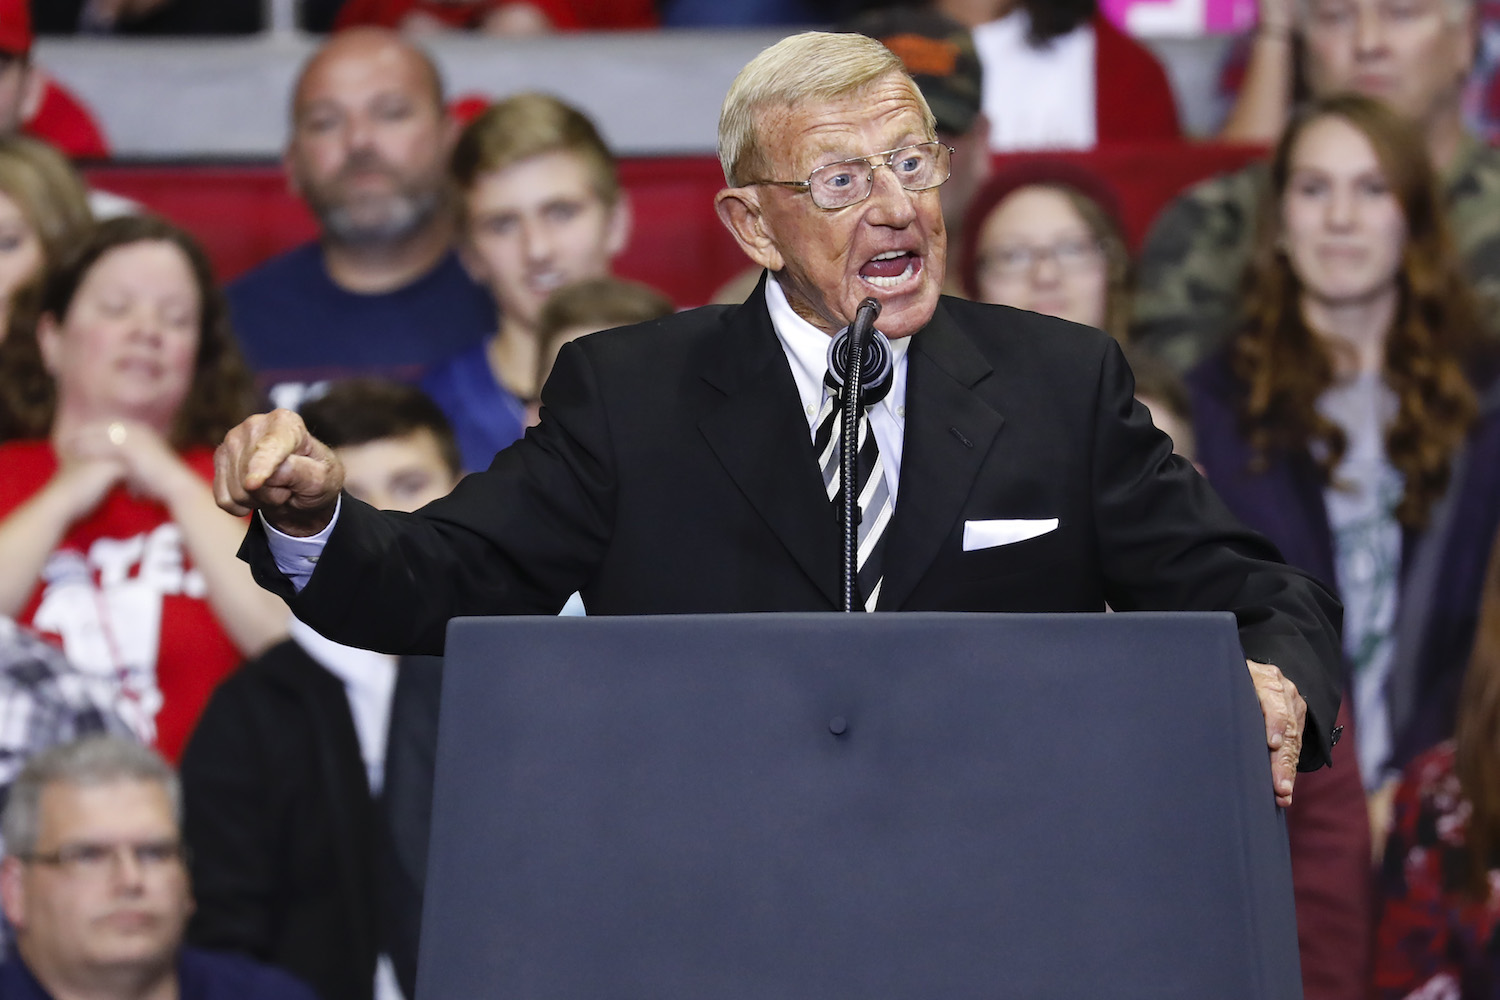 Lou Holtz Tests Positive for COVID-19 Months After He Compared Playing Football in Pandemic to Storming Normandy